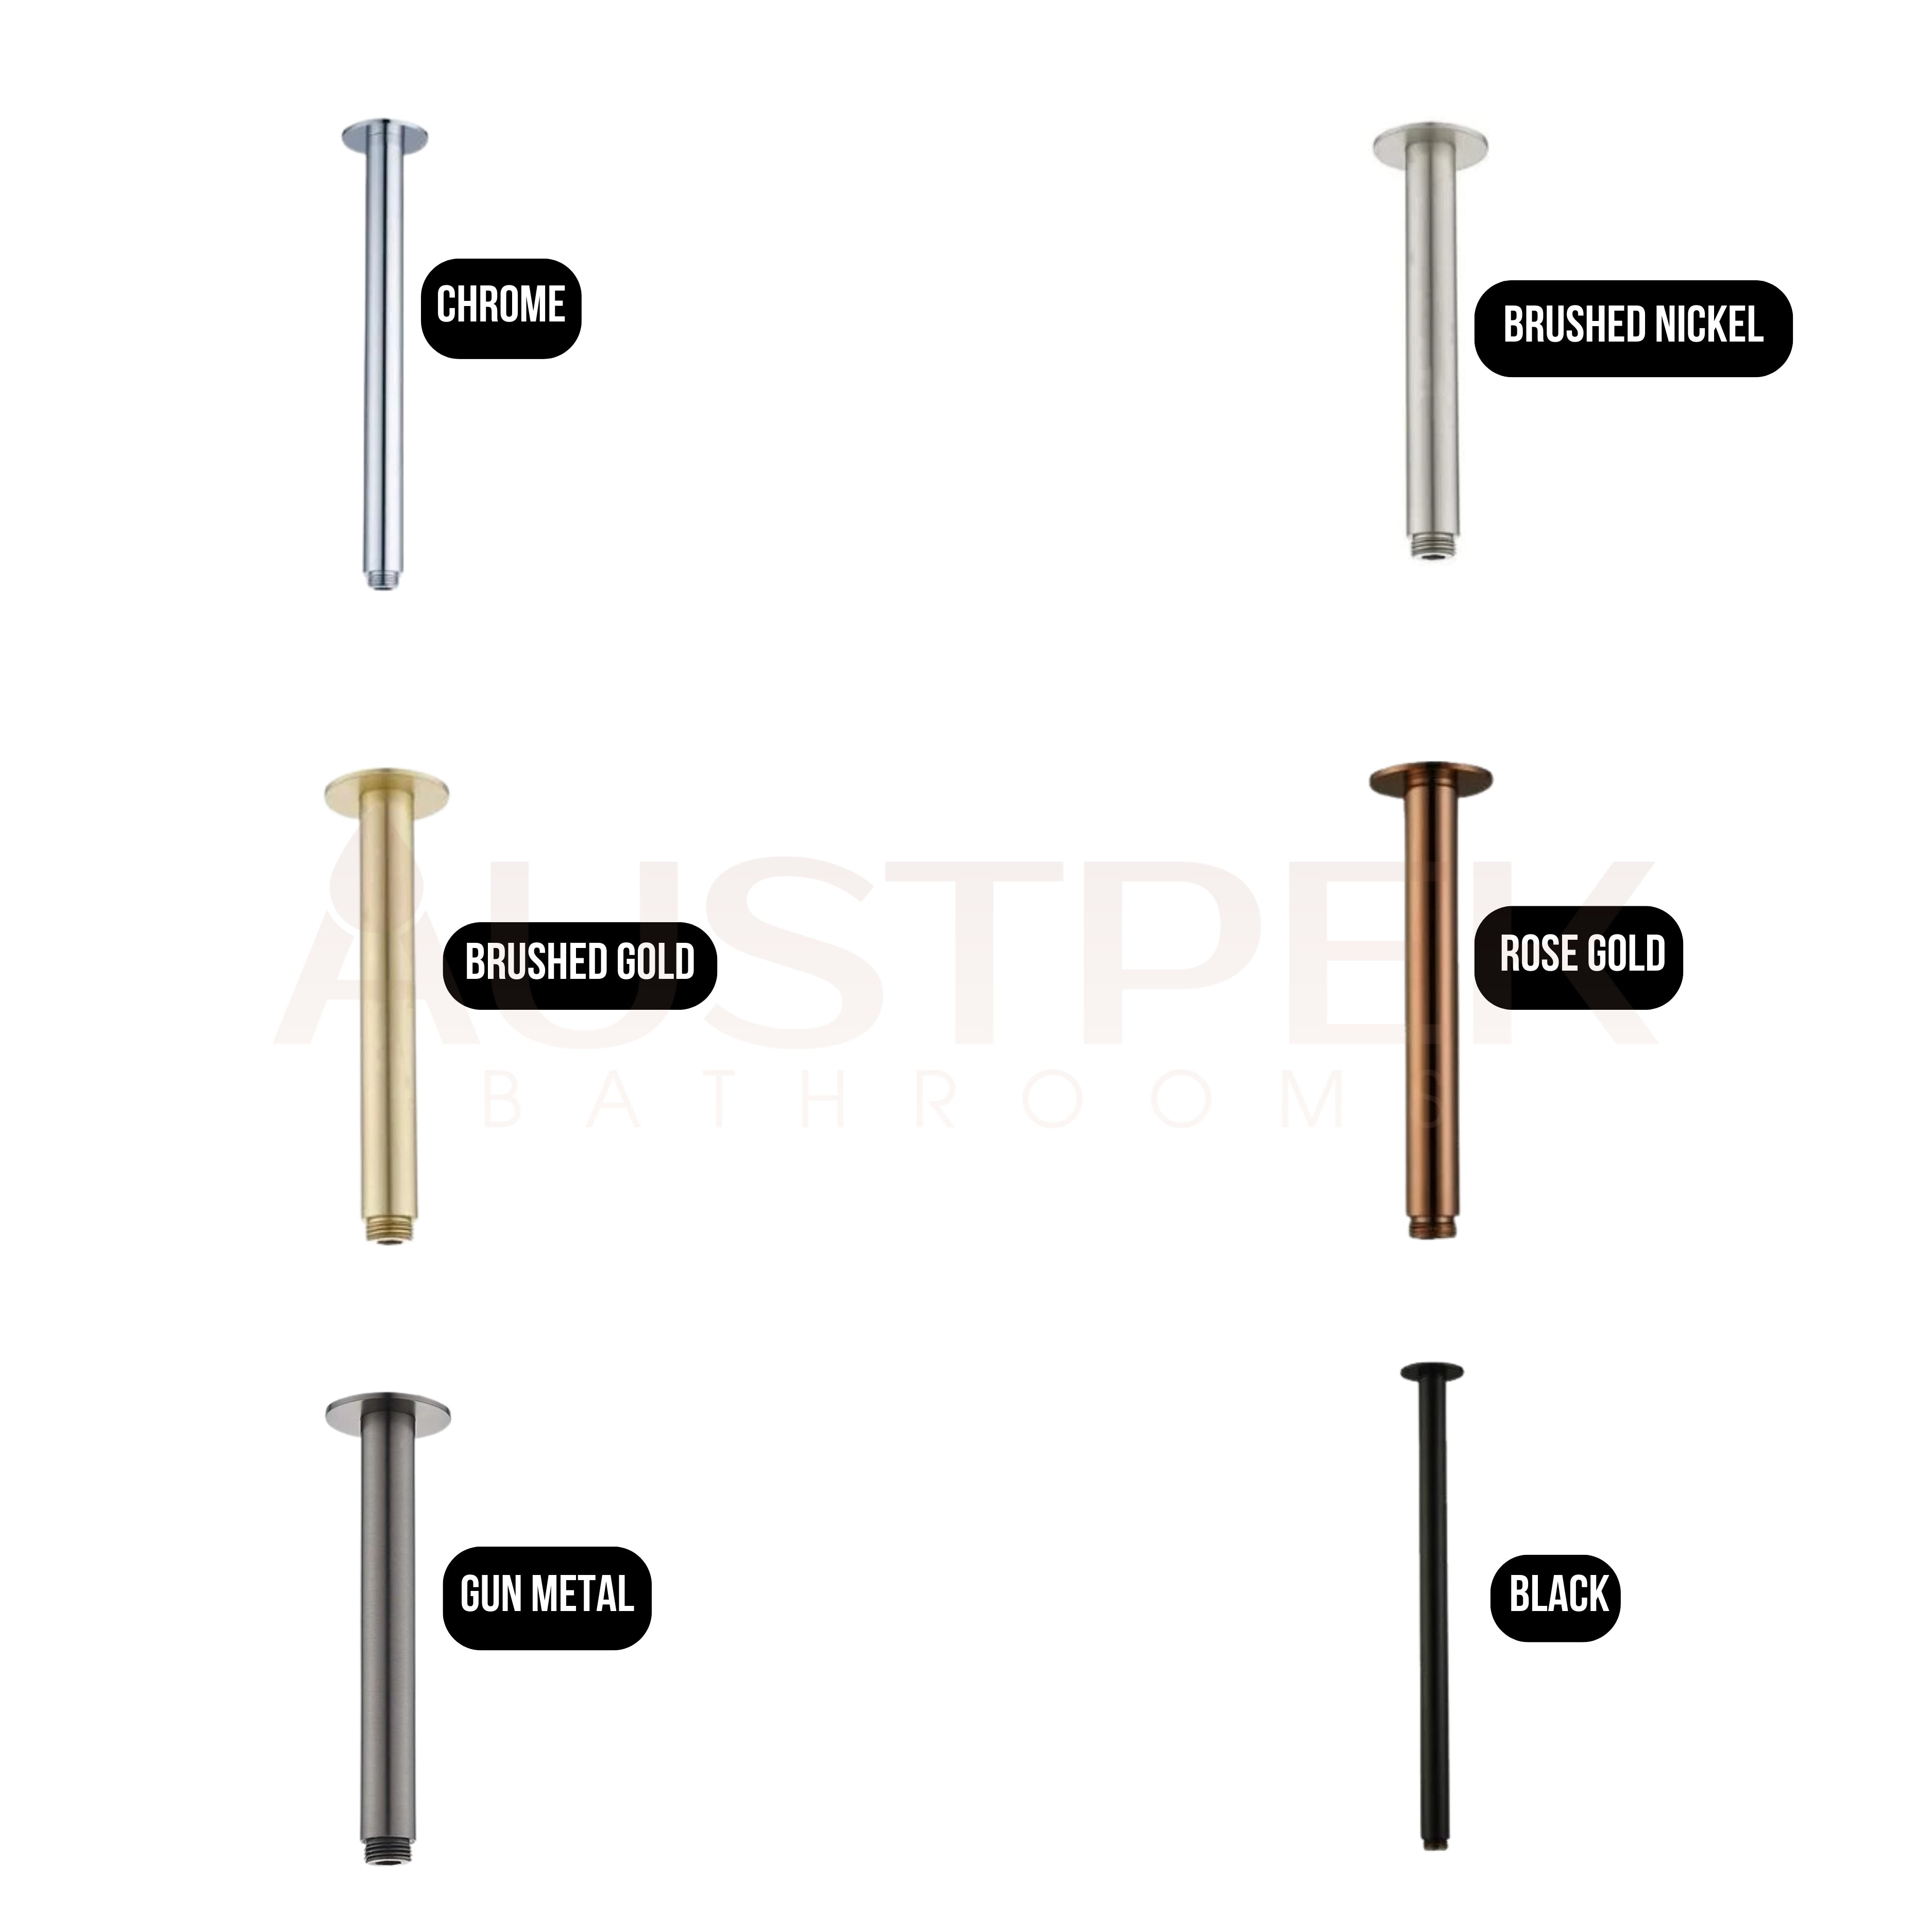 HELLYCAR CHRIS CEILING SHOWER ARM ROSE GOLD 100MM, 200MM,300MM AND 400MM